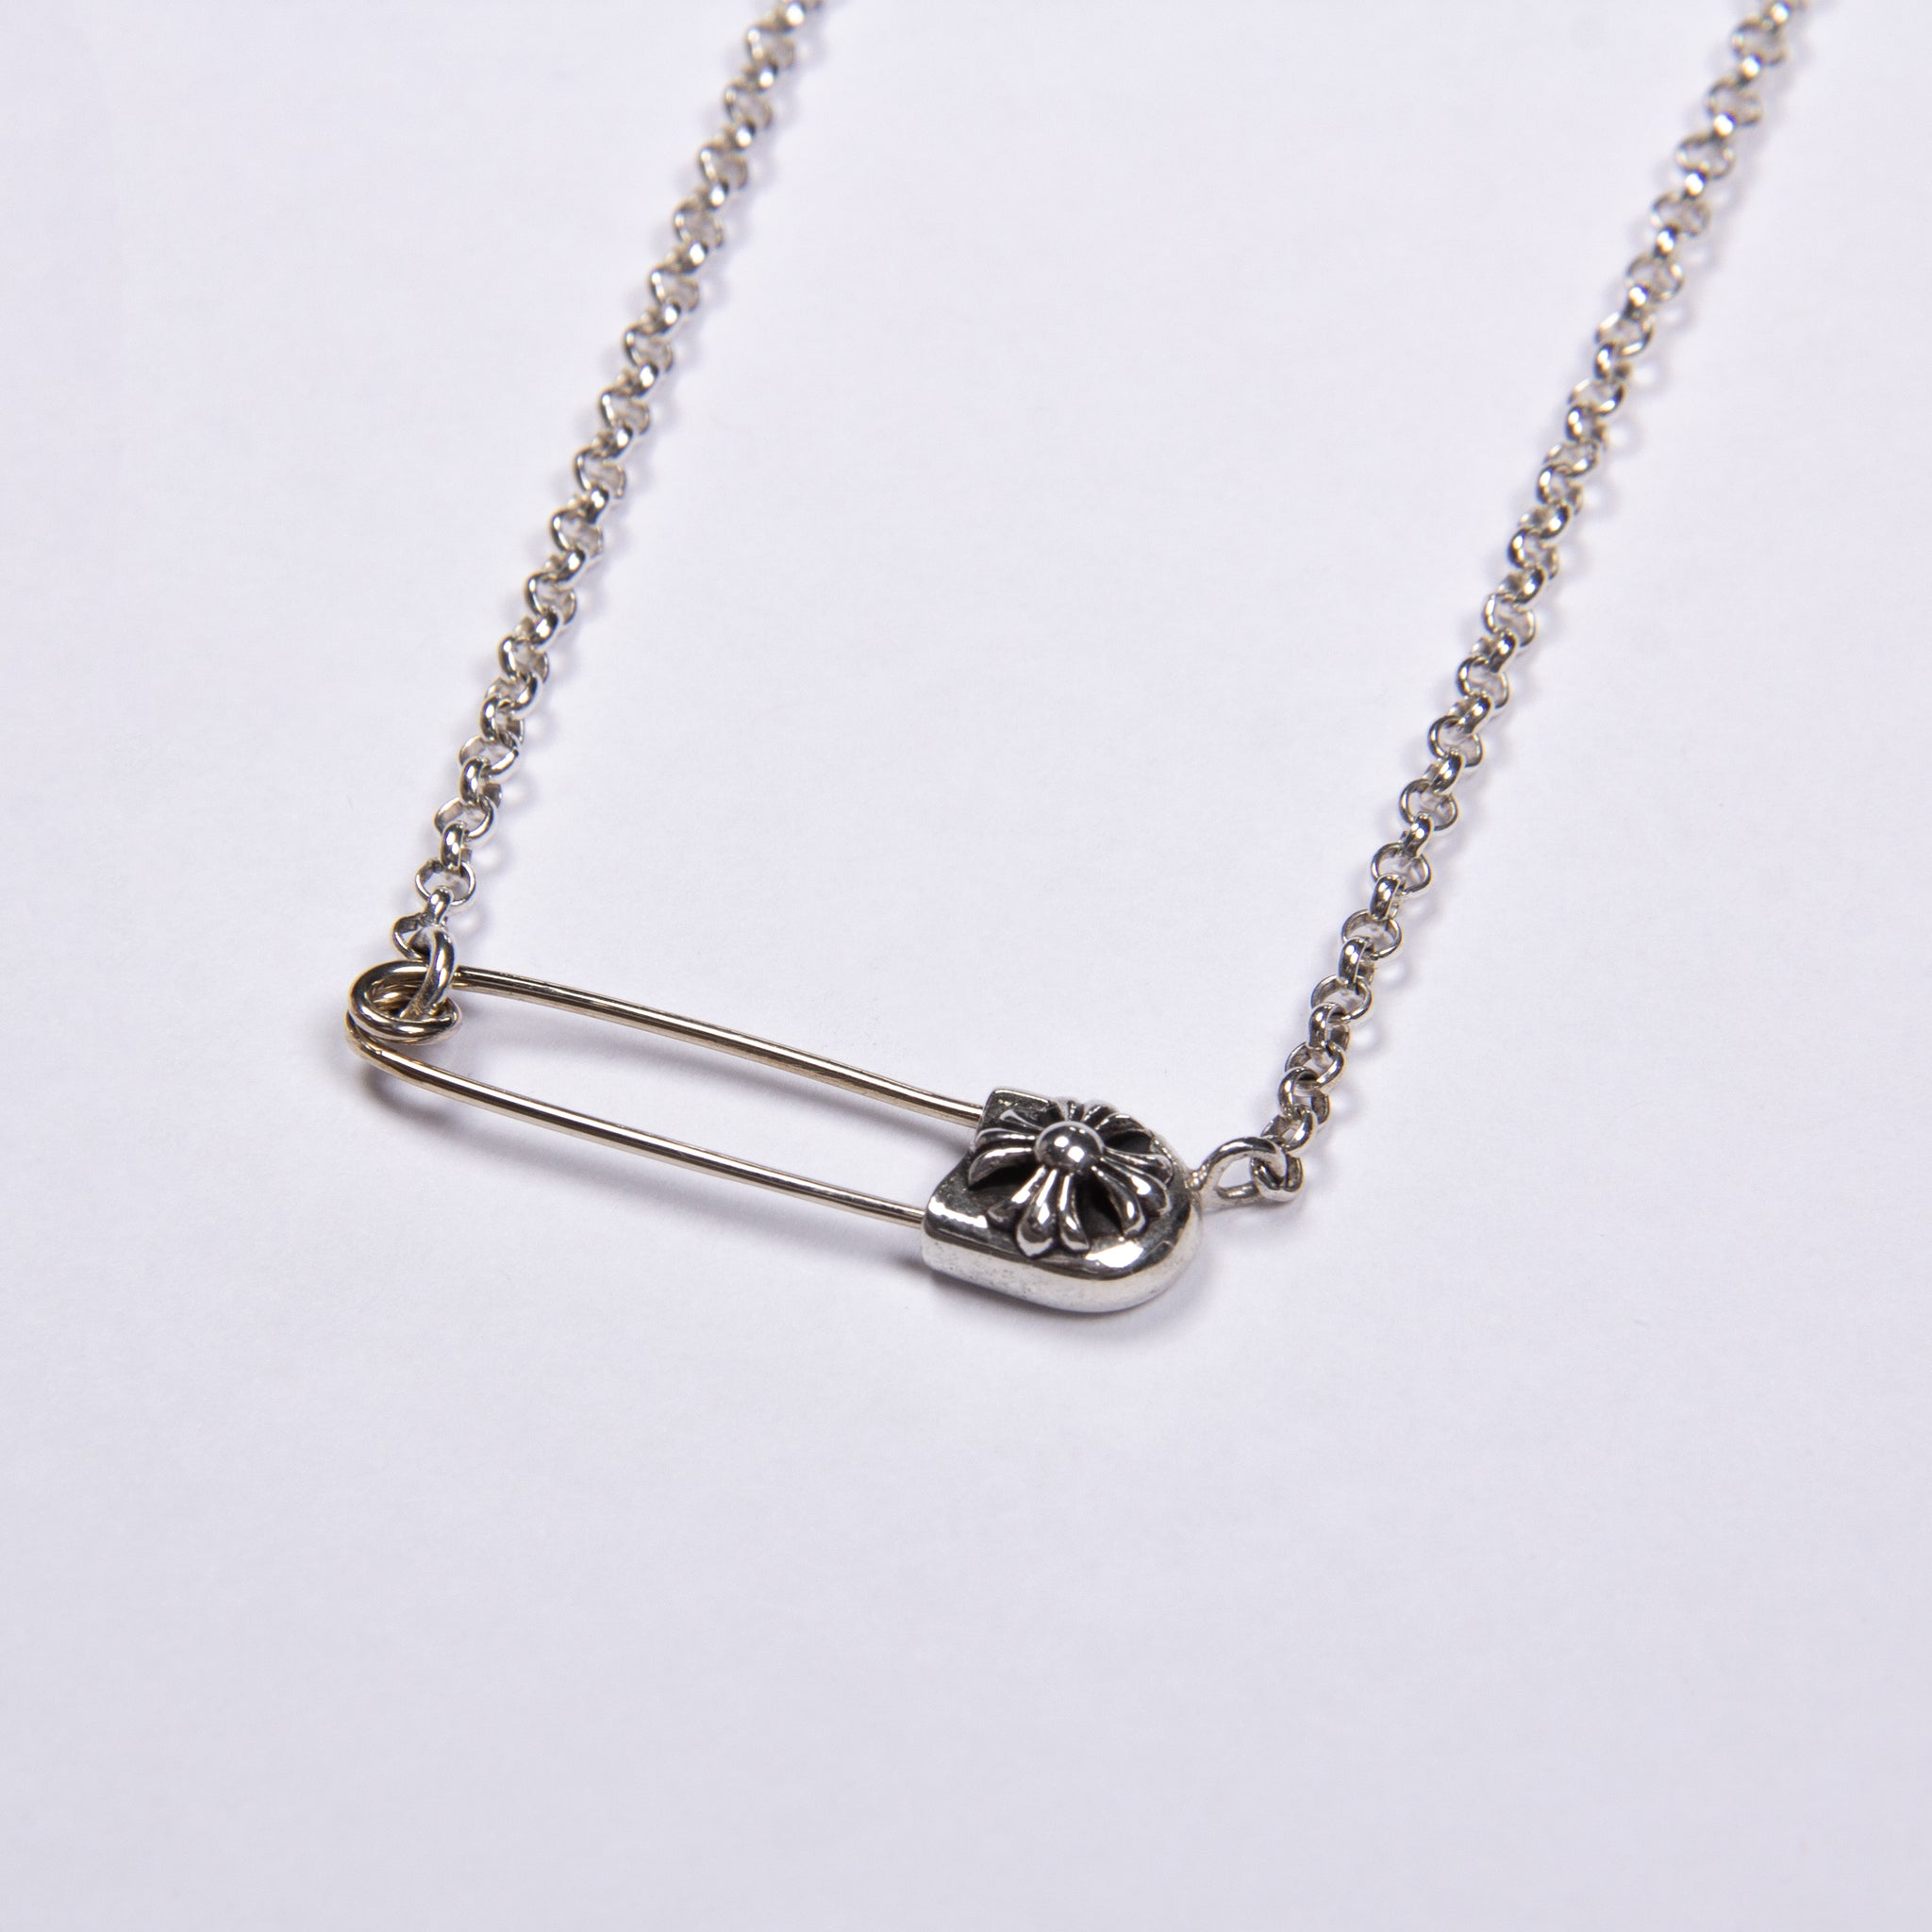 Safety Pin Necklace Sterling Silver | Musemond